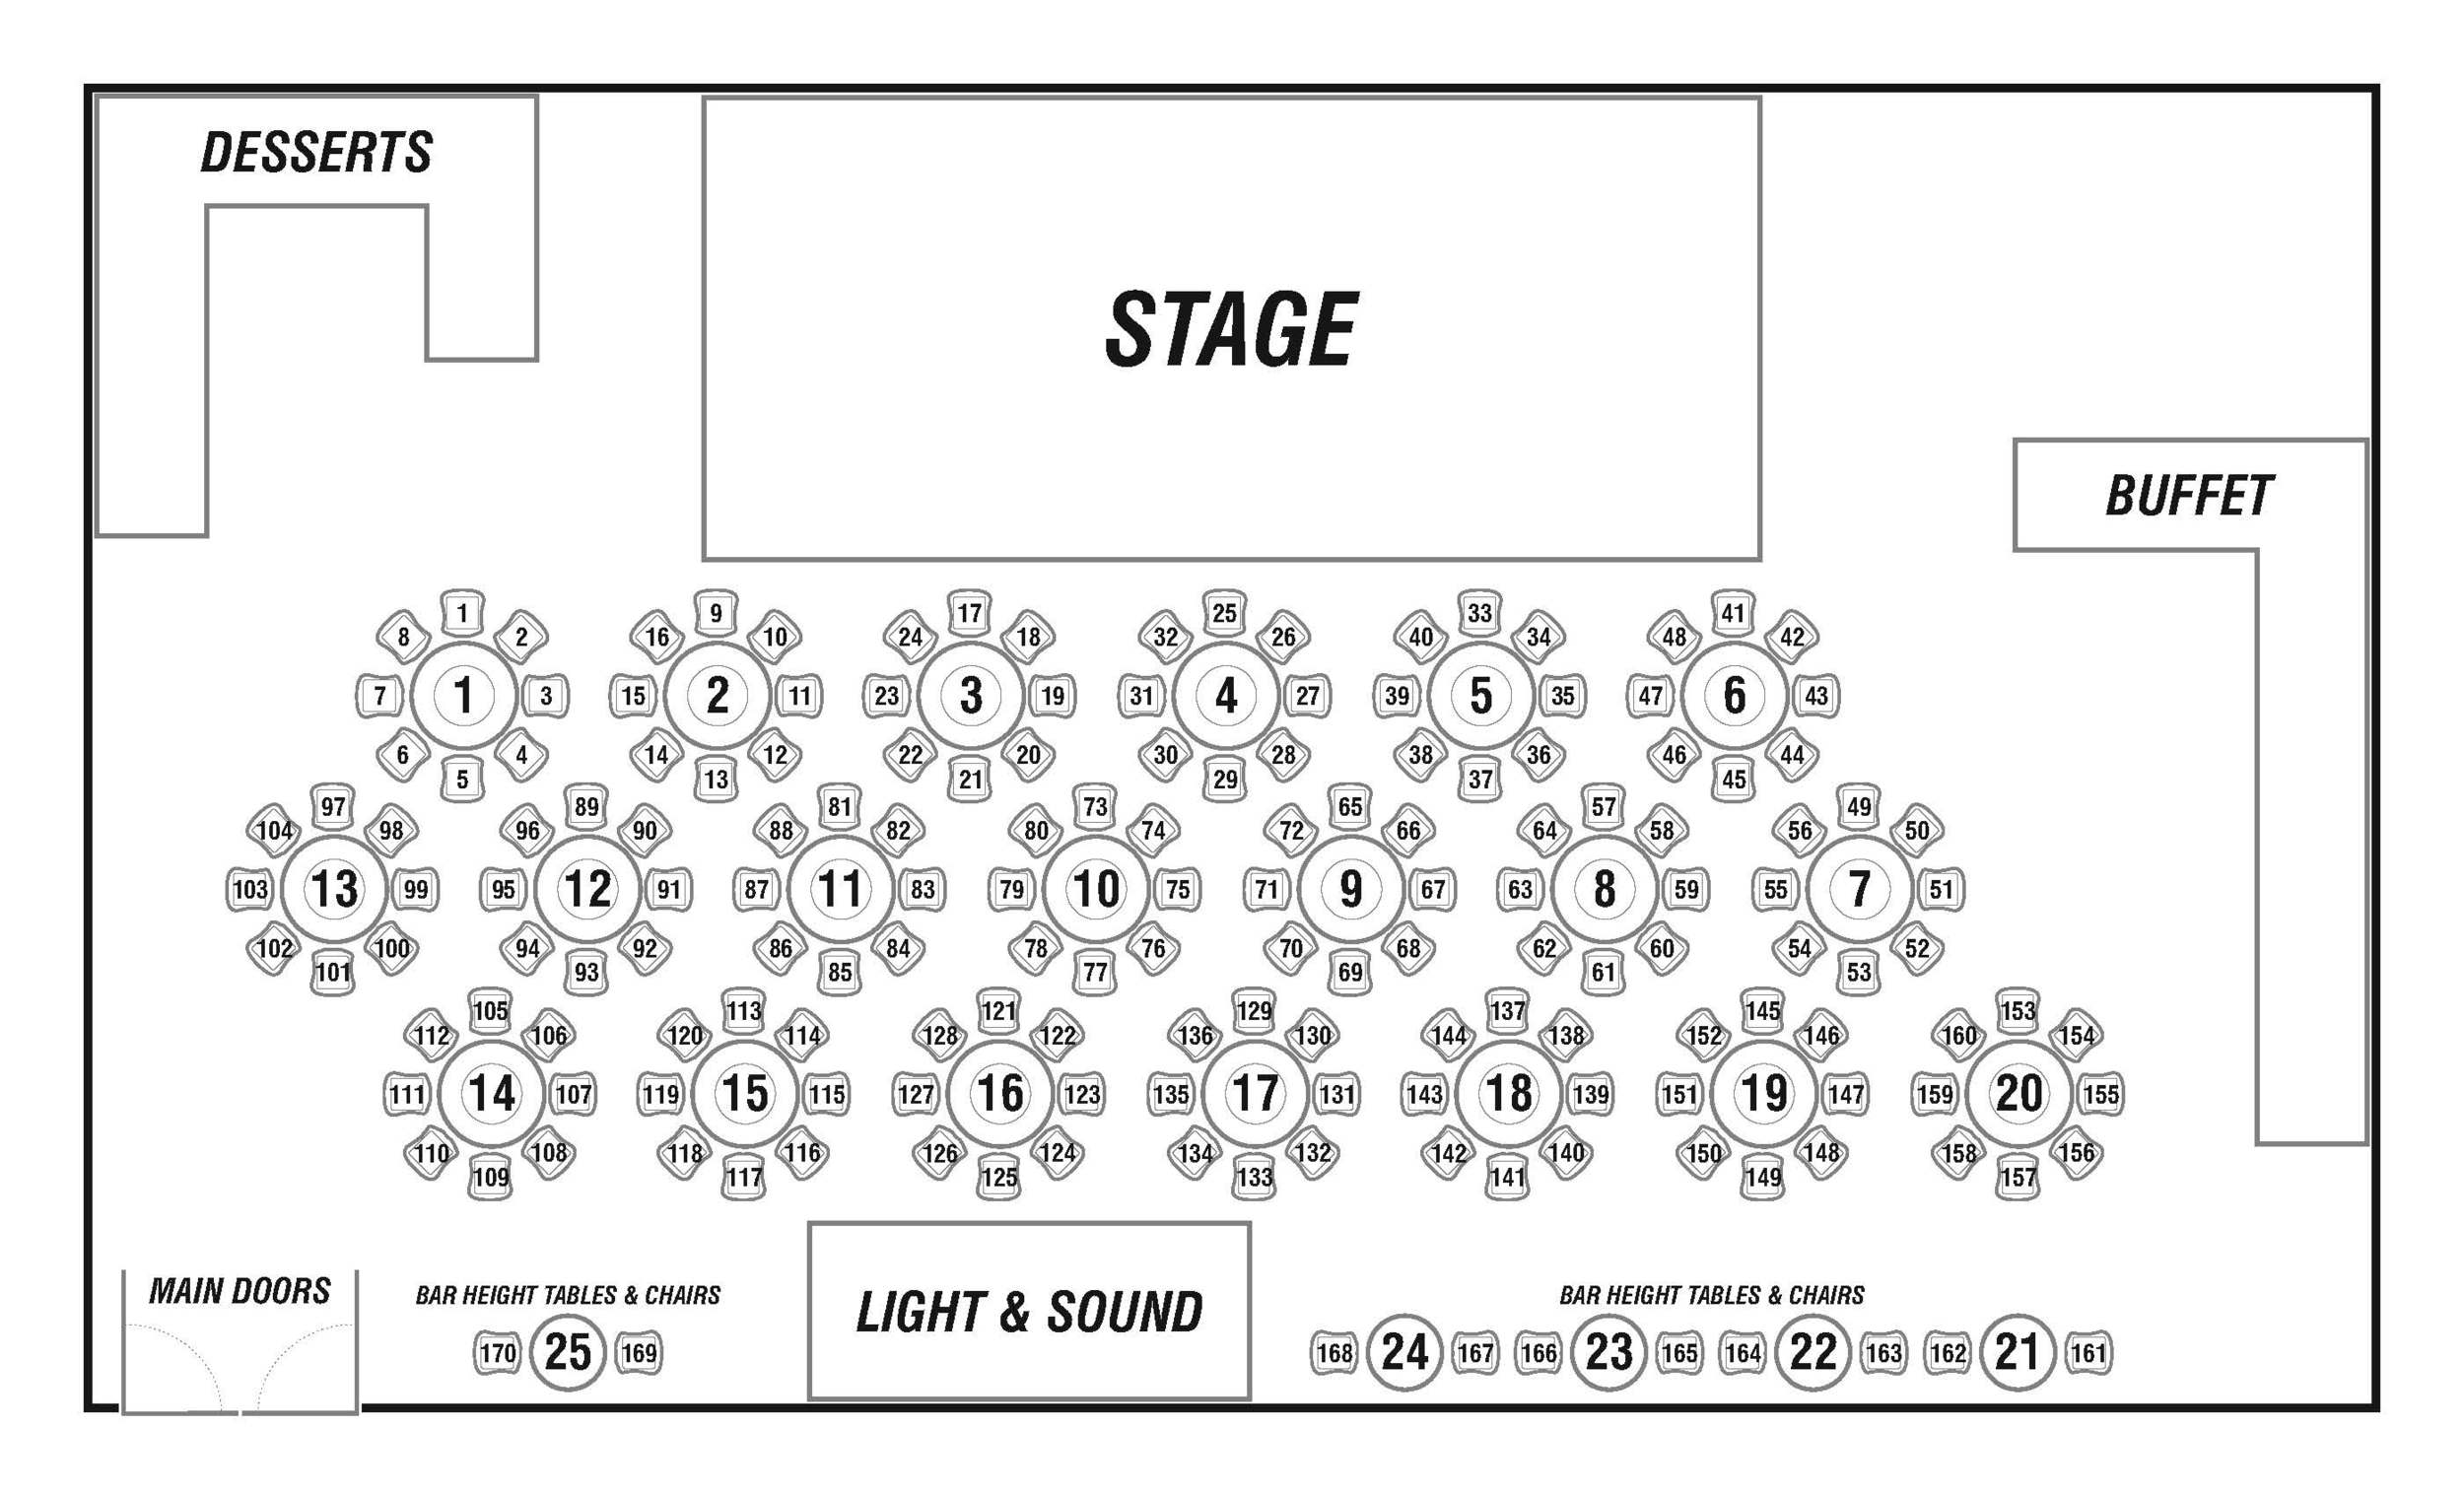 Cfr Red Deer Seating Chart